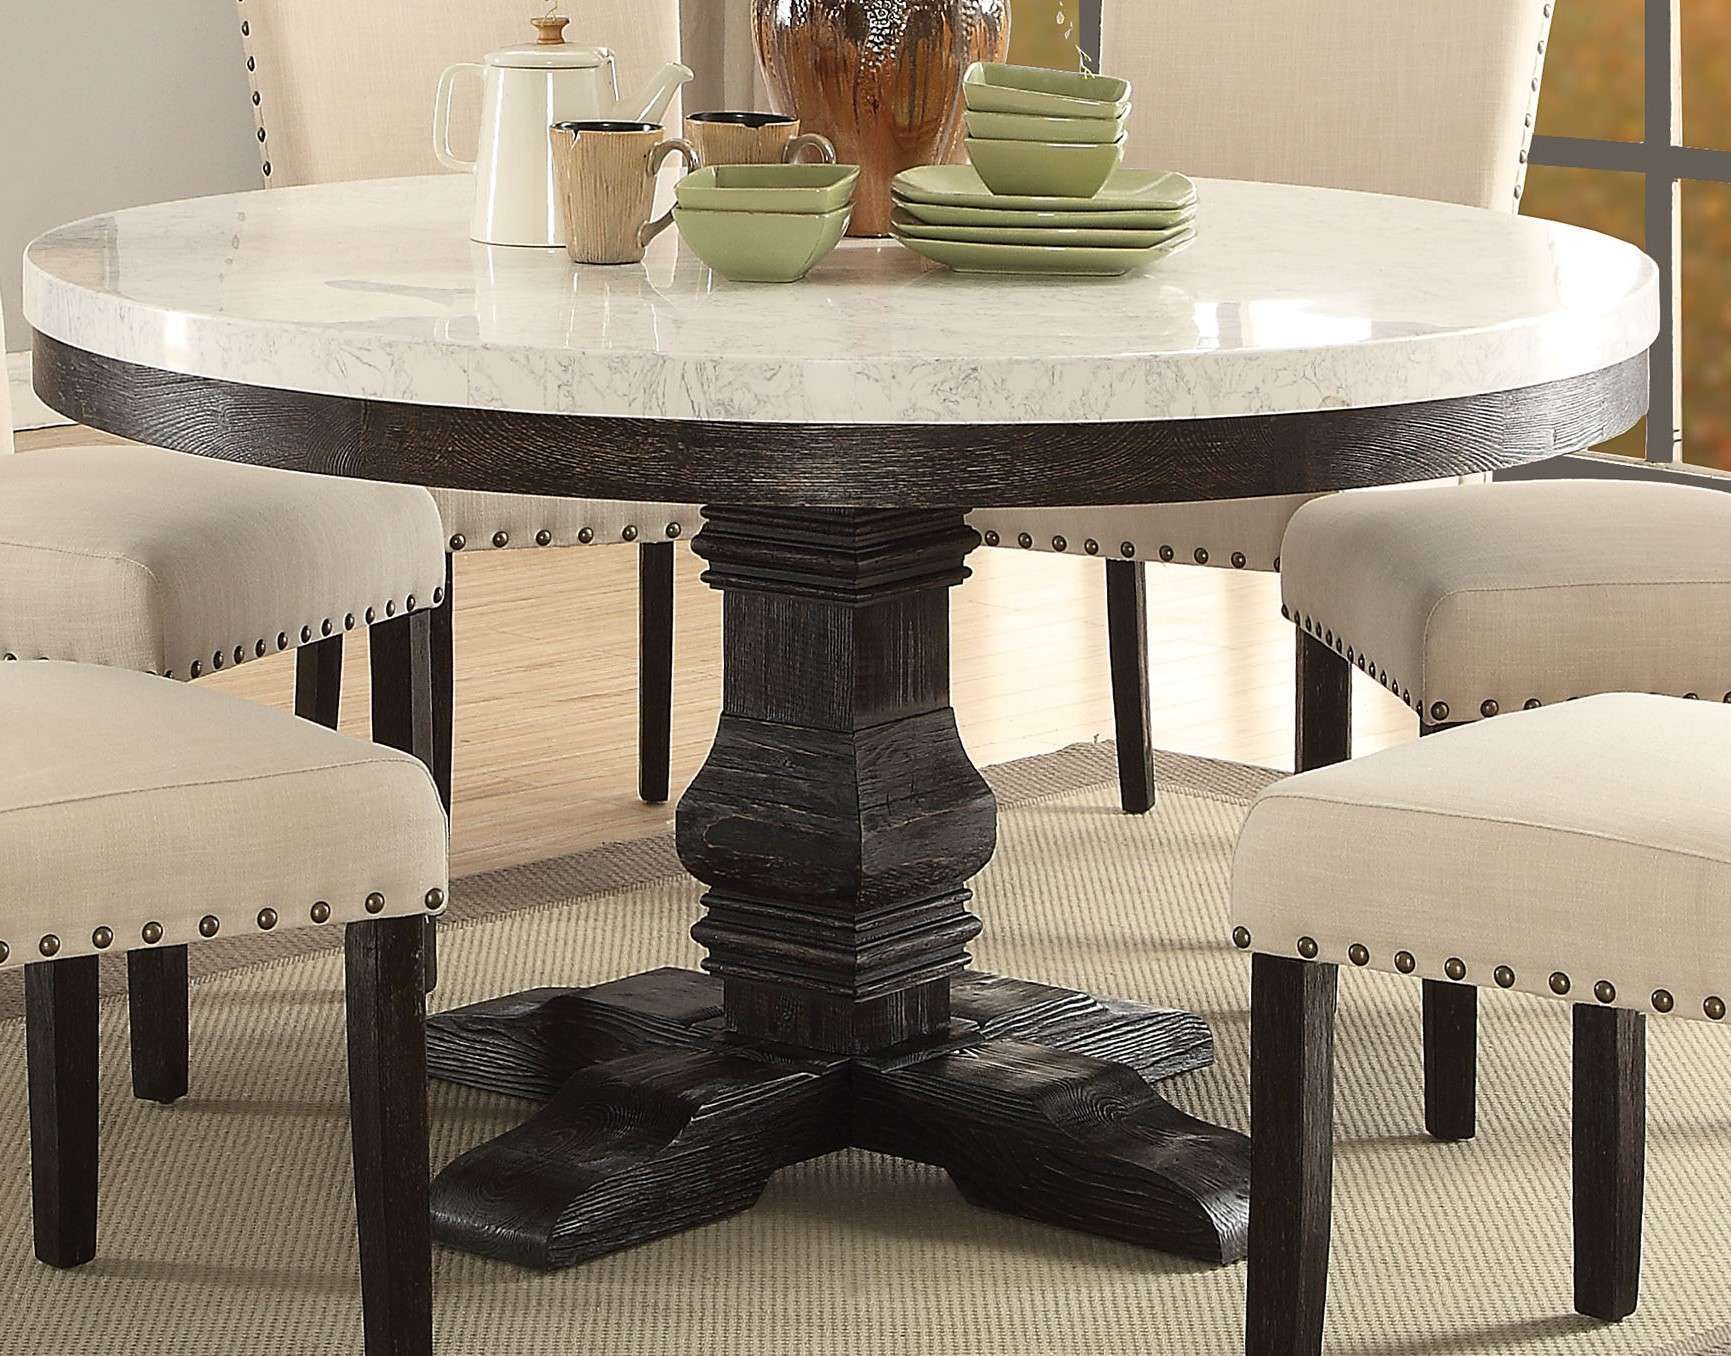 Acme Furniture 72845 Pertaining To Most Popular Nolan Round Pedestal Dining Tables (View 4 of 25)